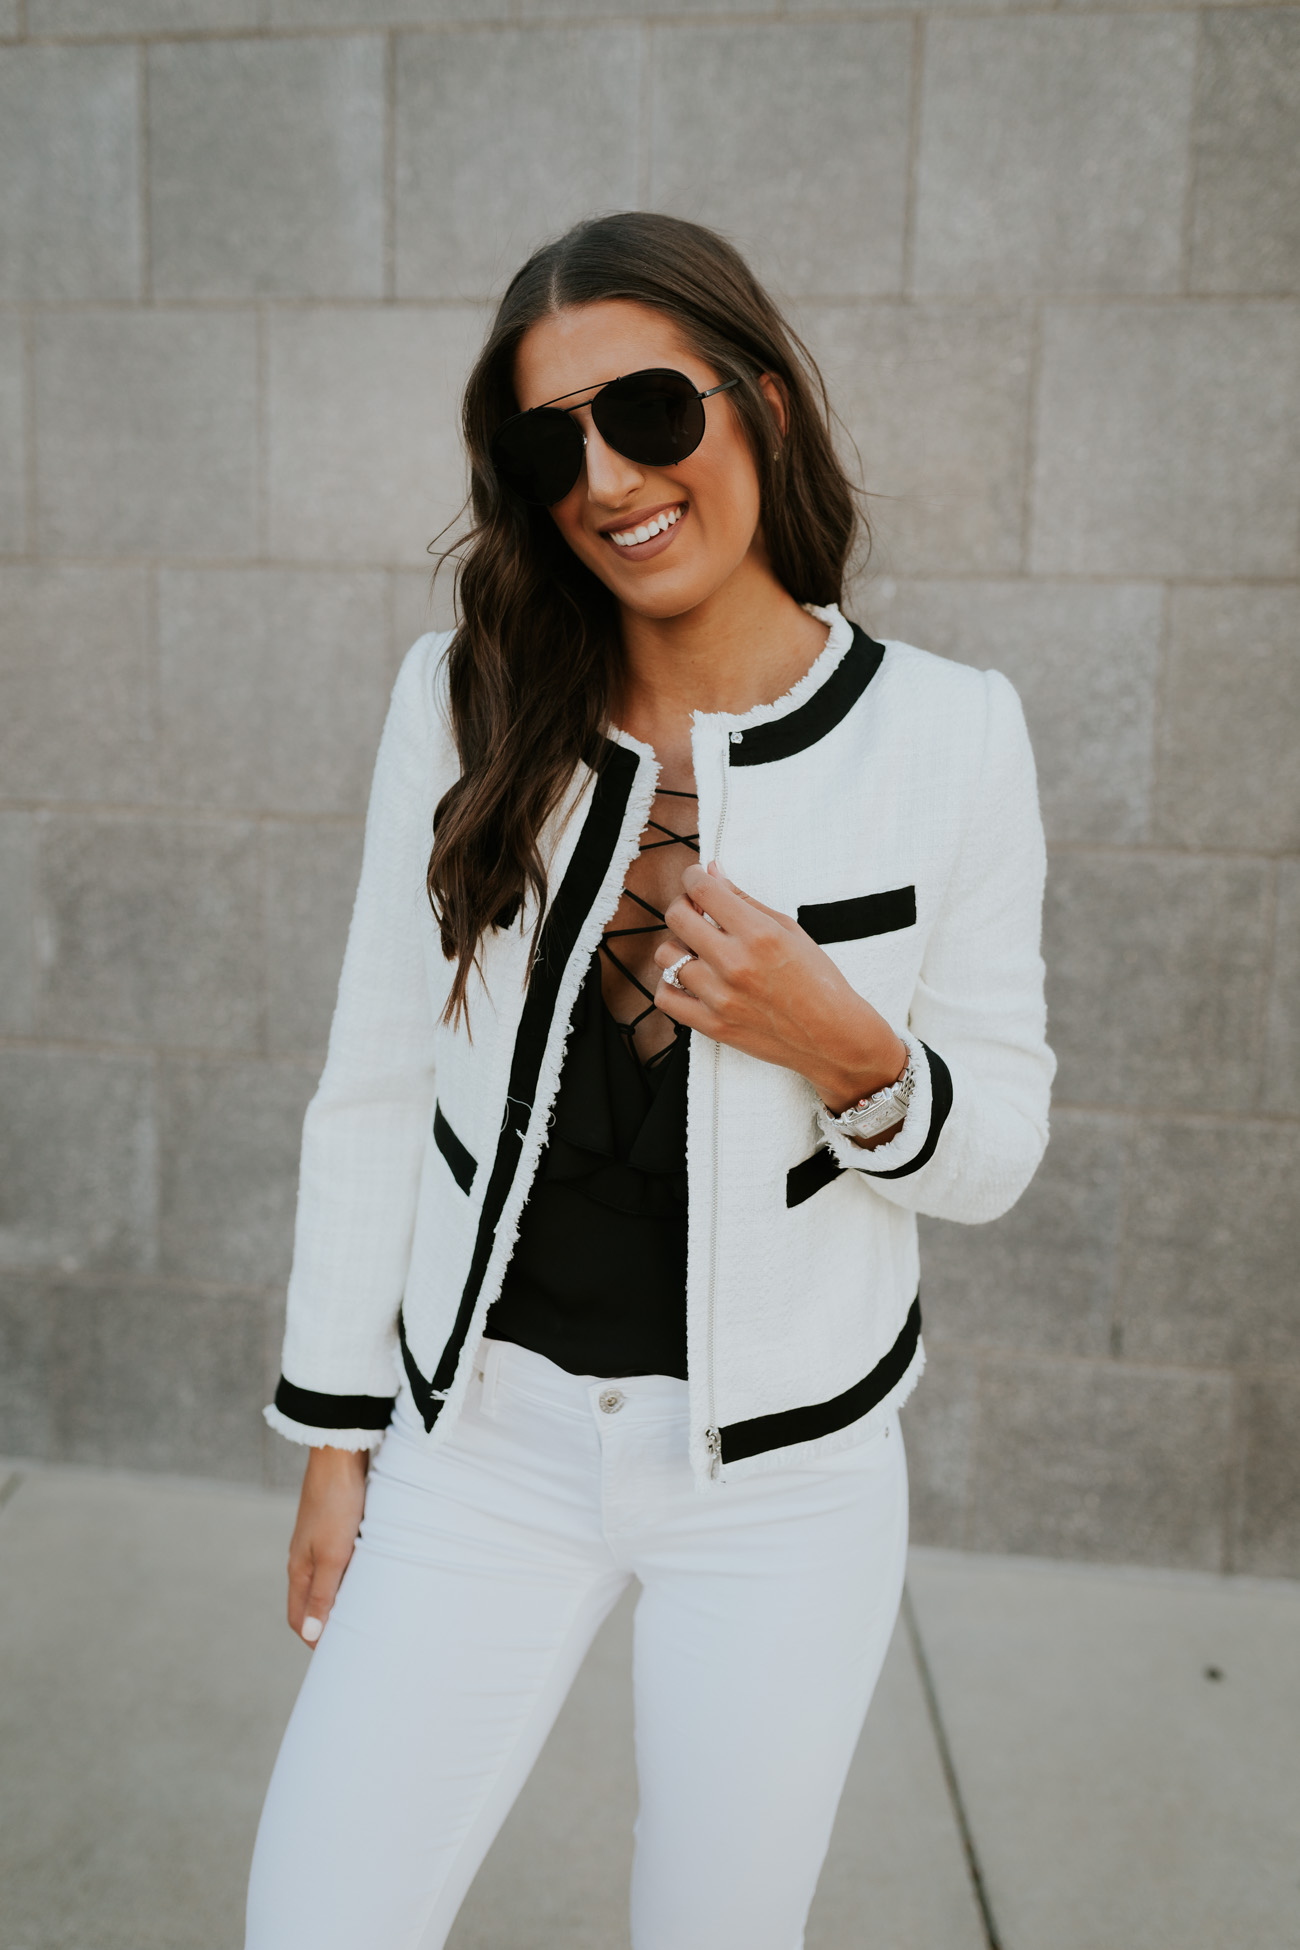 lace up cami, wayf lace up ruffle cami, preppy style, preppy jacket, tweed jacket, cece tweed jacket, 2018 nordstrom anniversary sale public access, shop nordstrom, nordstrom shoes, nordstrom dresses, nordstrom handbag sale, nordstrom anniversary sale dates, Nordstrom Anniversary Sale 2018, nordstrom anniversary sale picks, nordstrom anniversary sale catalog, sale picks for nordstrom anniversary sale 2018, information on nordstrom anniversary sale, nordstrom credit card, nordstrom debit card, nordstrom rewards, nordstrom sale, nordstrom anniversary sale finds, nsale finds, nsale picks, nike on sale, cute fall outfit, fall style, fall inspo, fall sale, nordstrom anniversary sale public access, 2018 nordstrom anniversary sale public access // grace wainwright a southern drawl